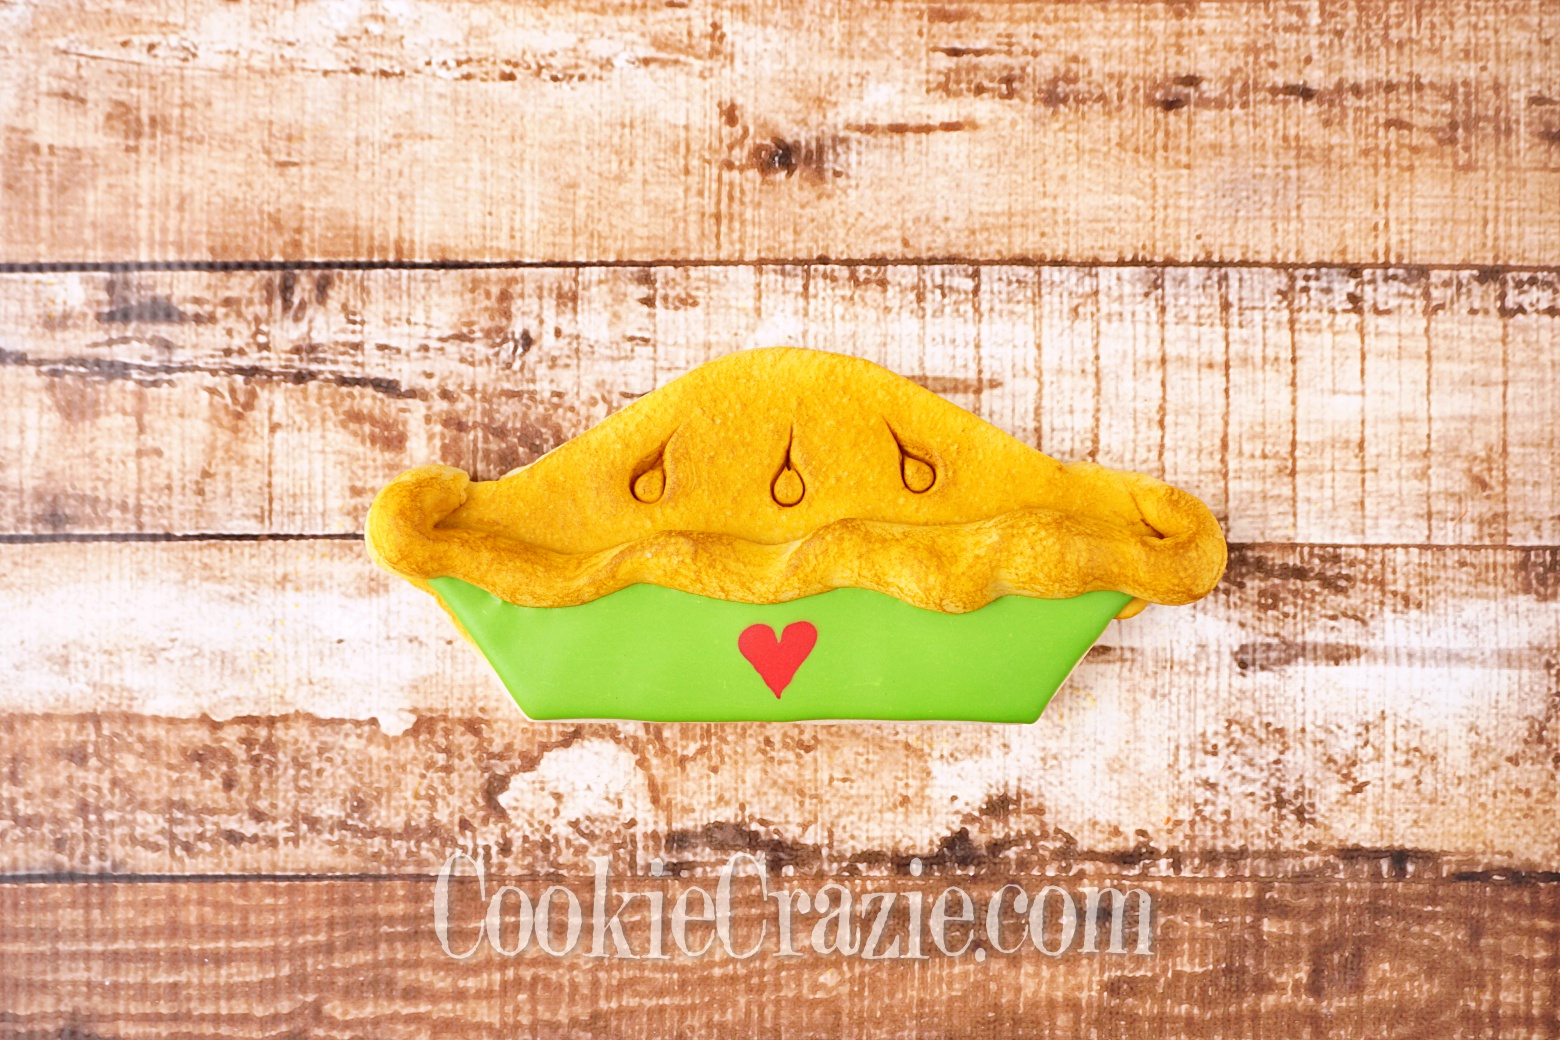  Apple Pie Decorated Sugar Cookie YouTube video  HERE  